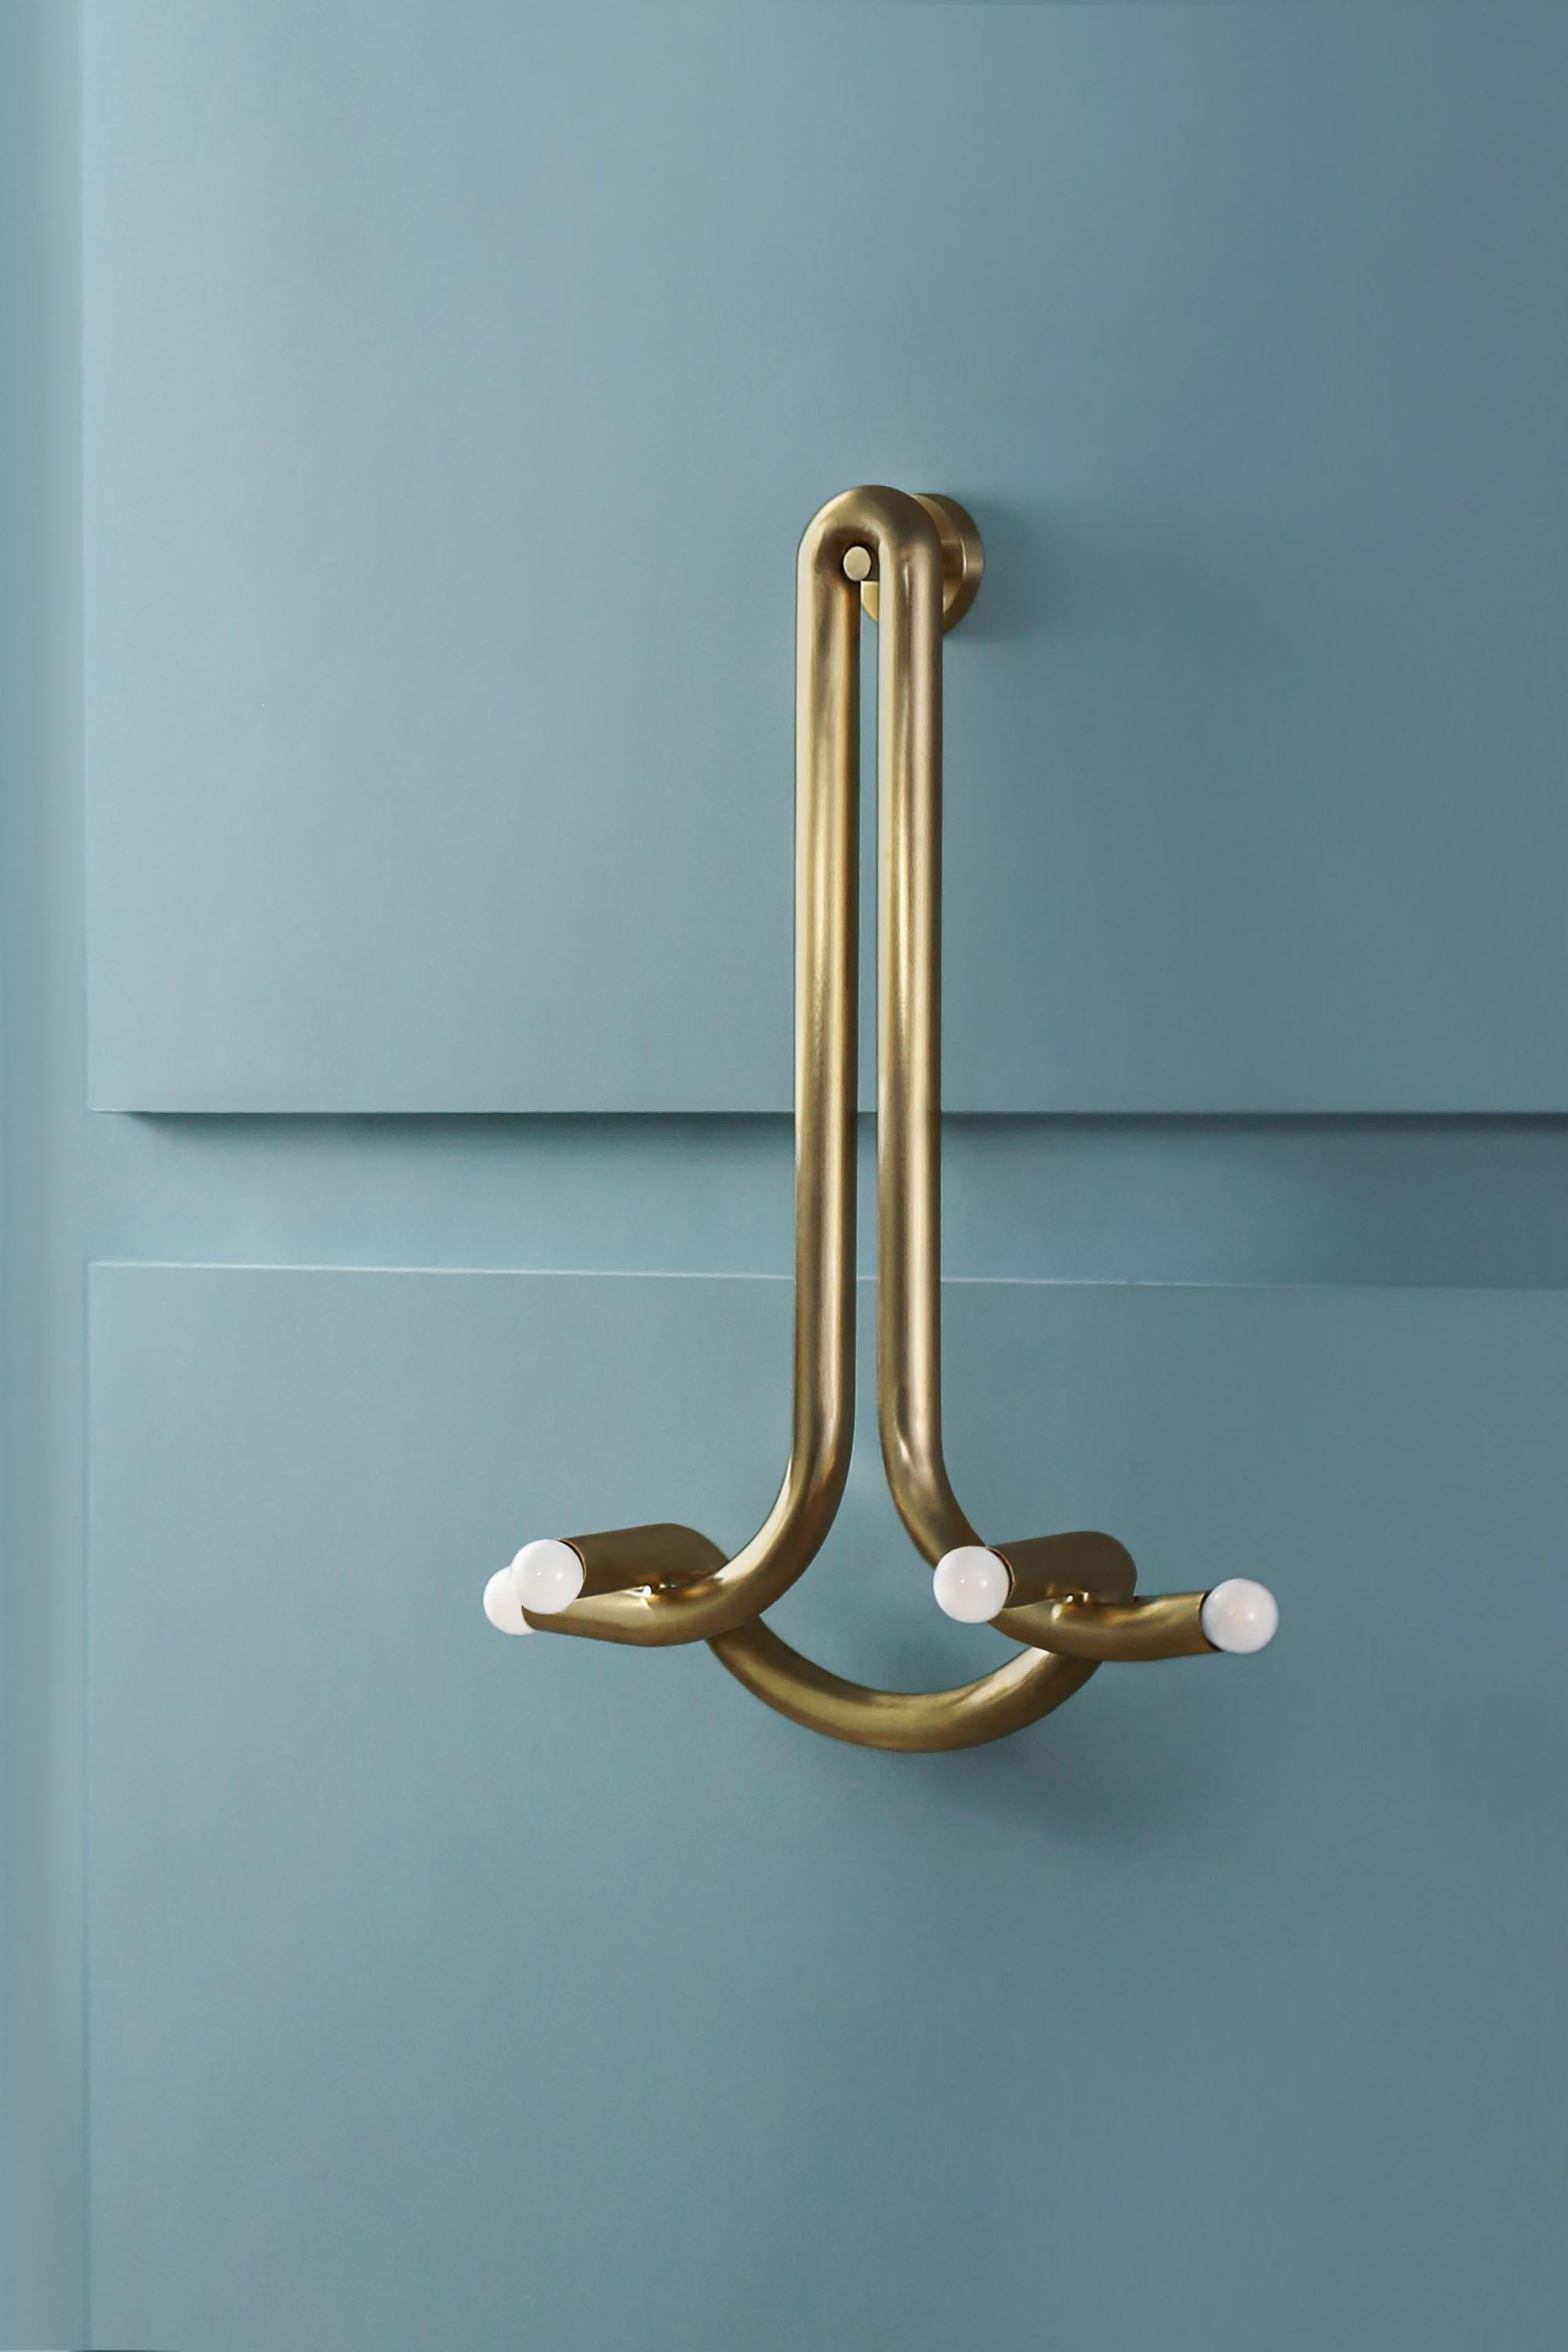 Contemporary Raw Brass Wall Sconce, God Sconce by Paul Matter

The God Sconce explores the relationship between two interlocked forms in perfect union and balance . A study of form and function that evokes the grace and strength of the contributor